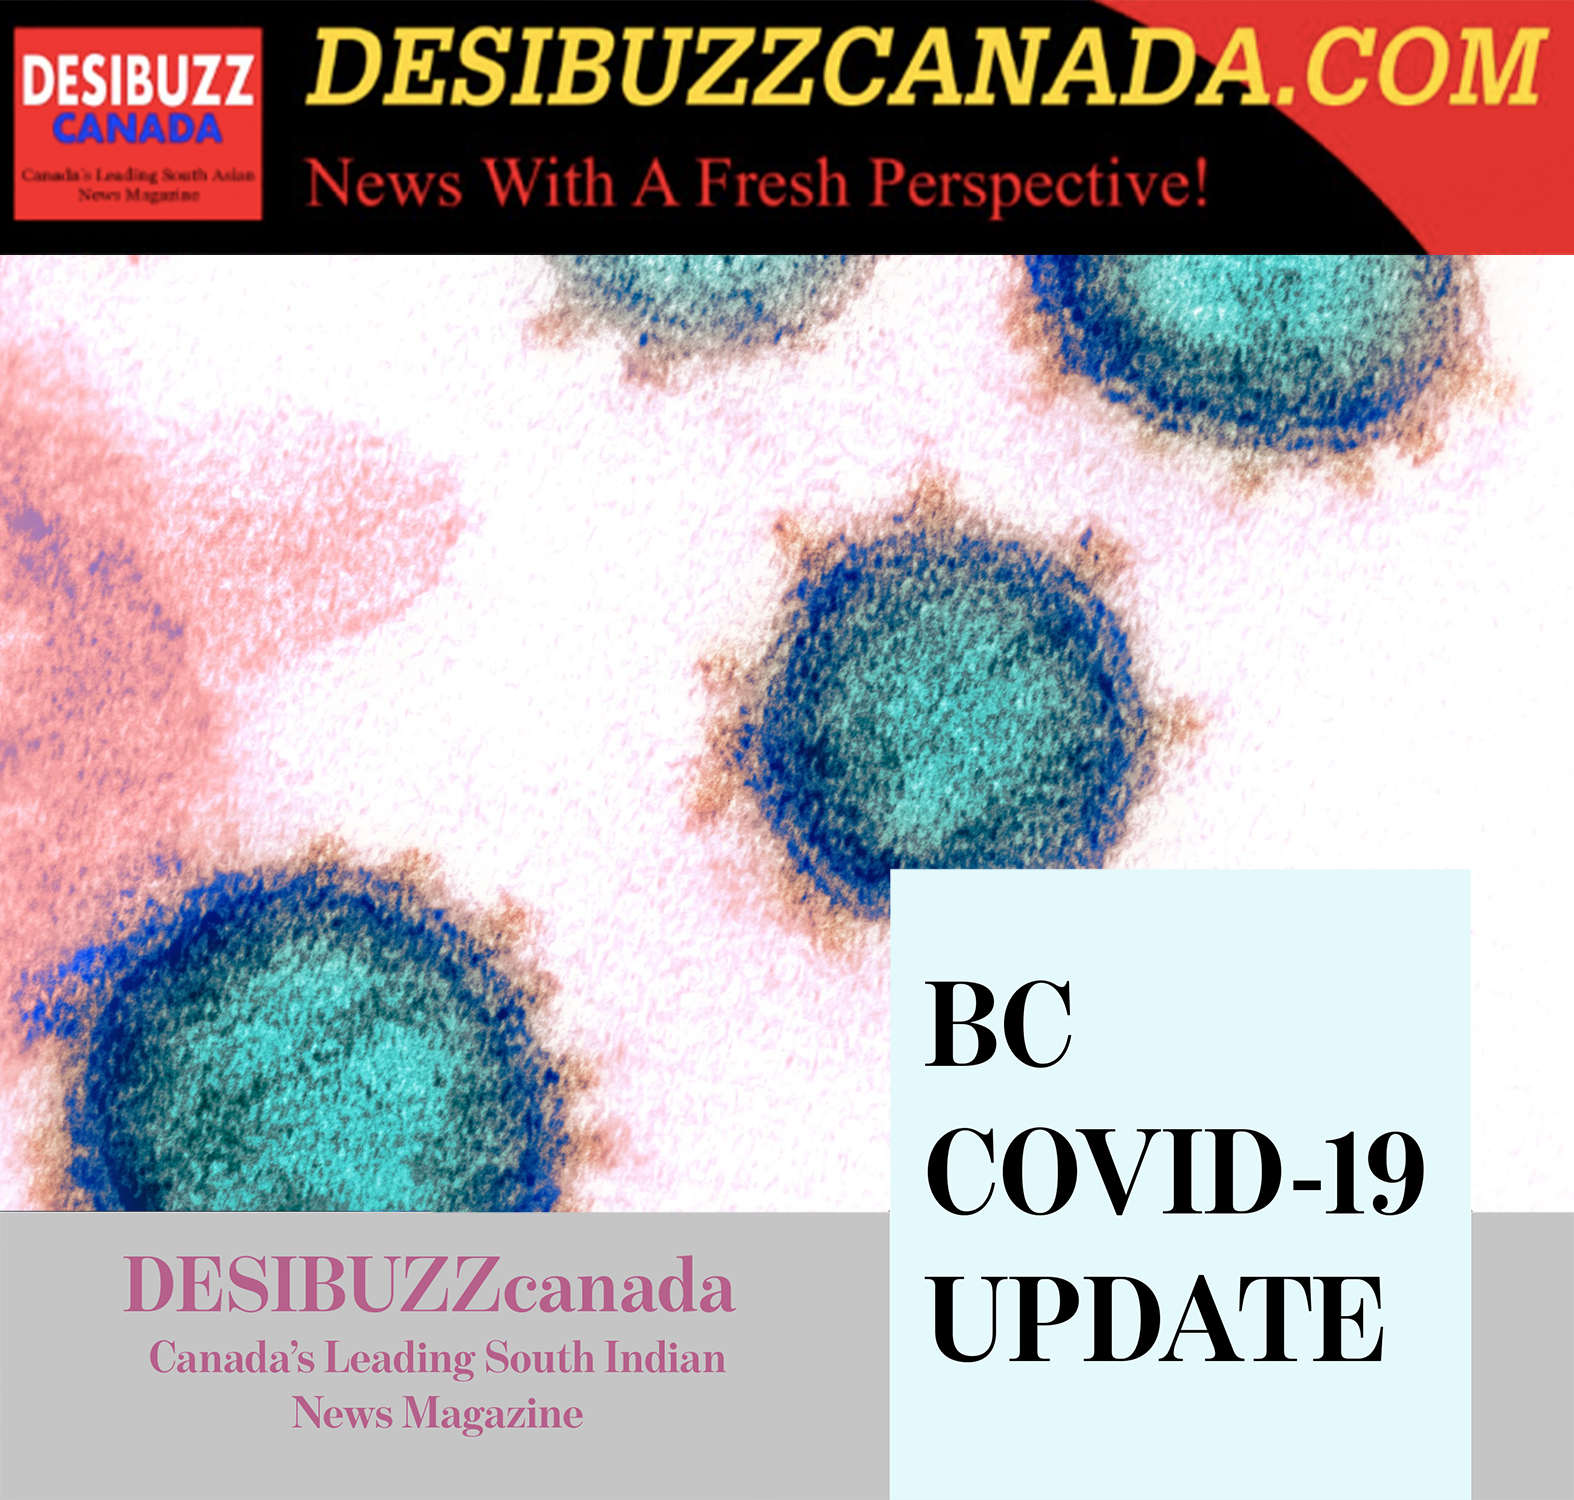 BC COVID-19 UPDATE: Over 200 Cases And One Death Reported Wednesday